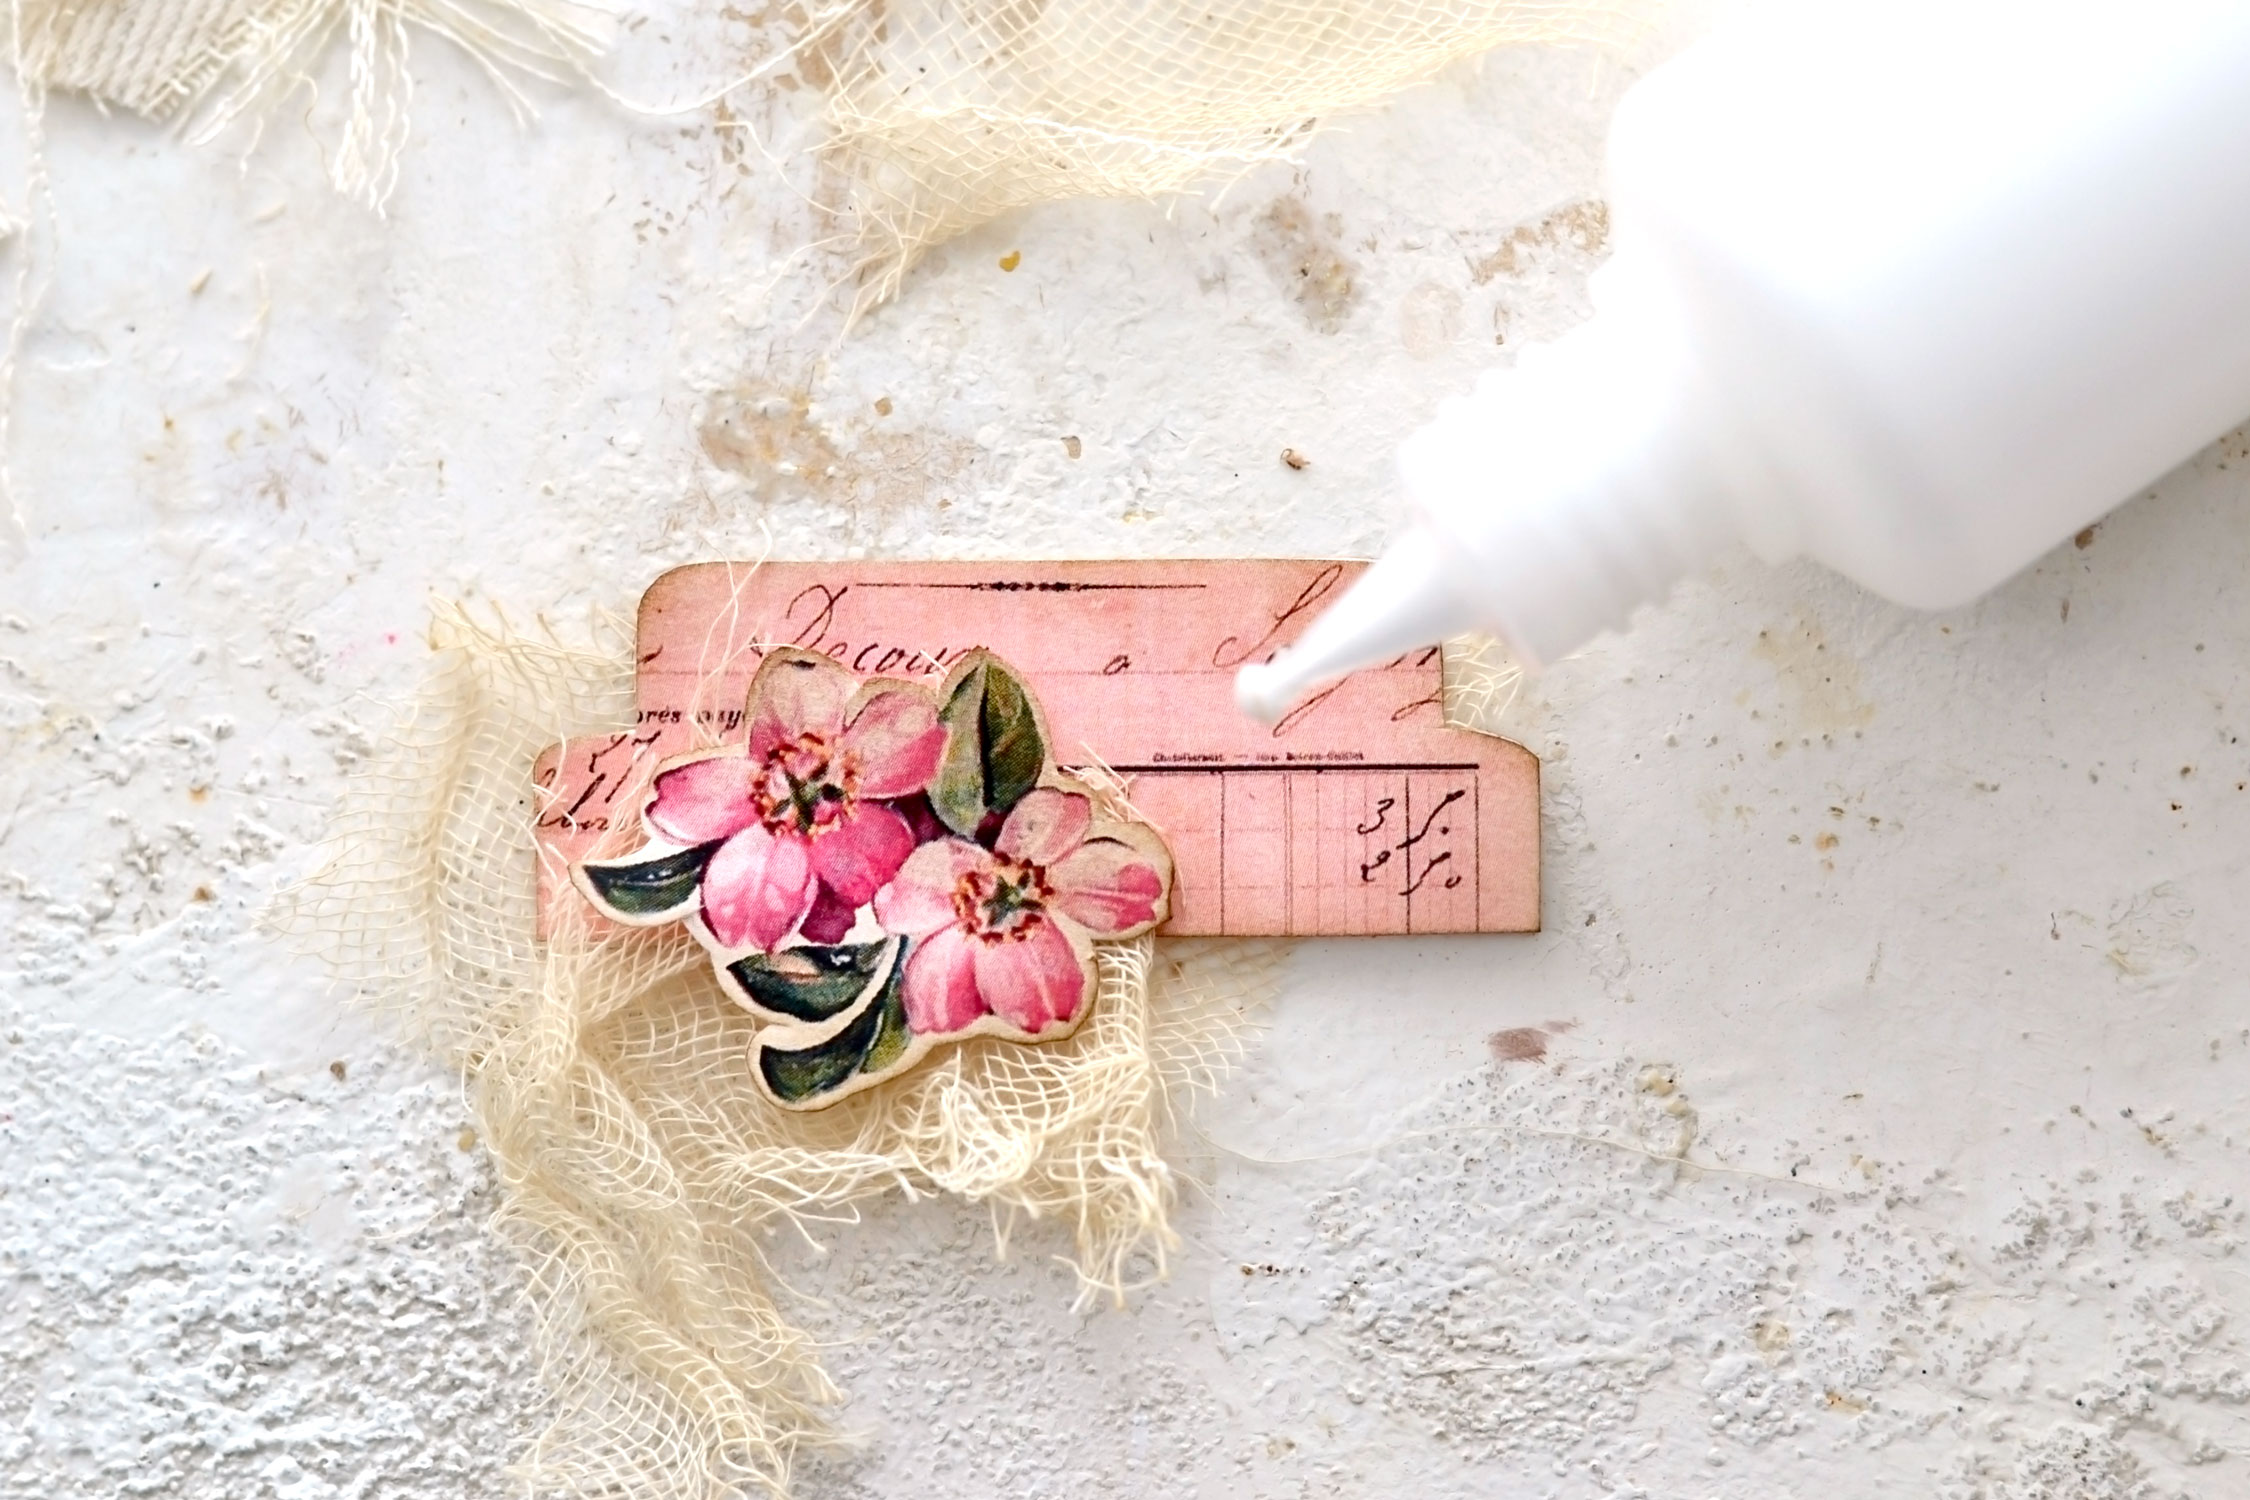 gluing a tab with gauze and flowers